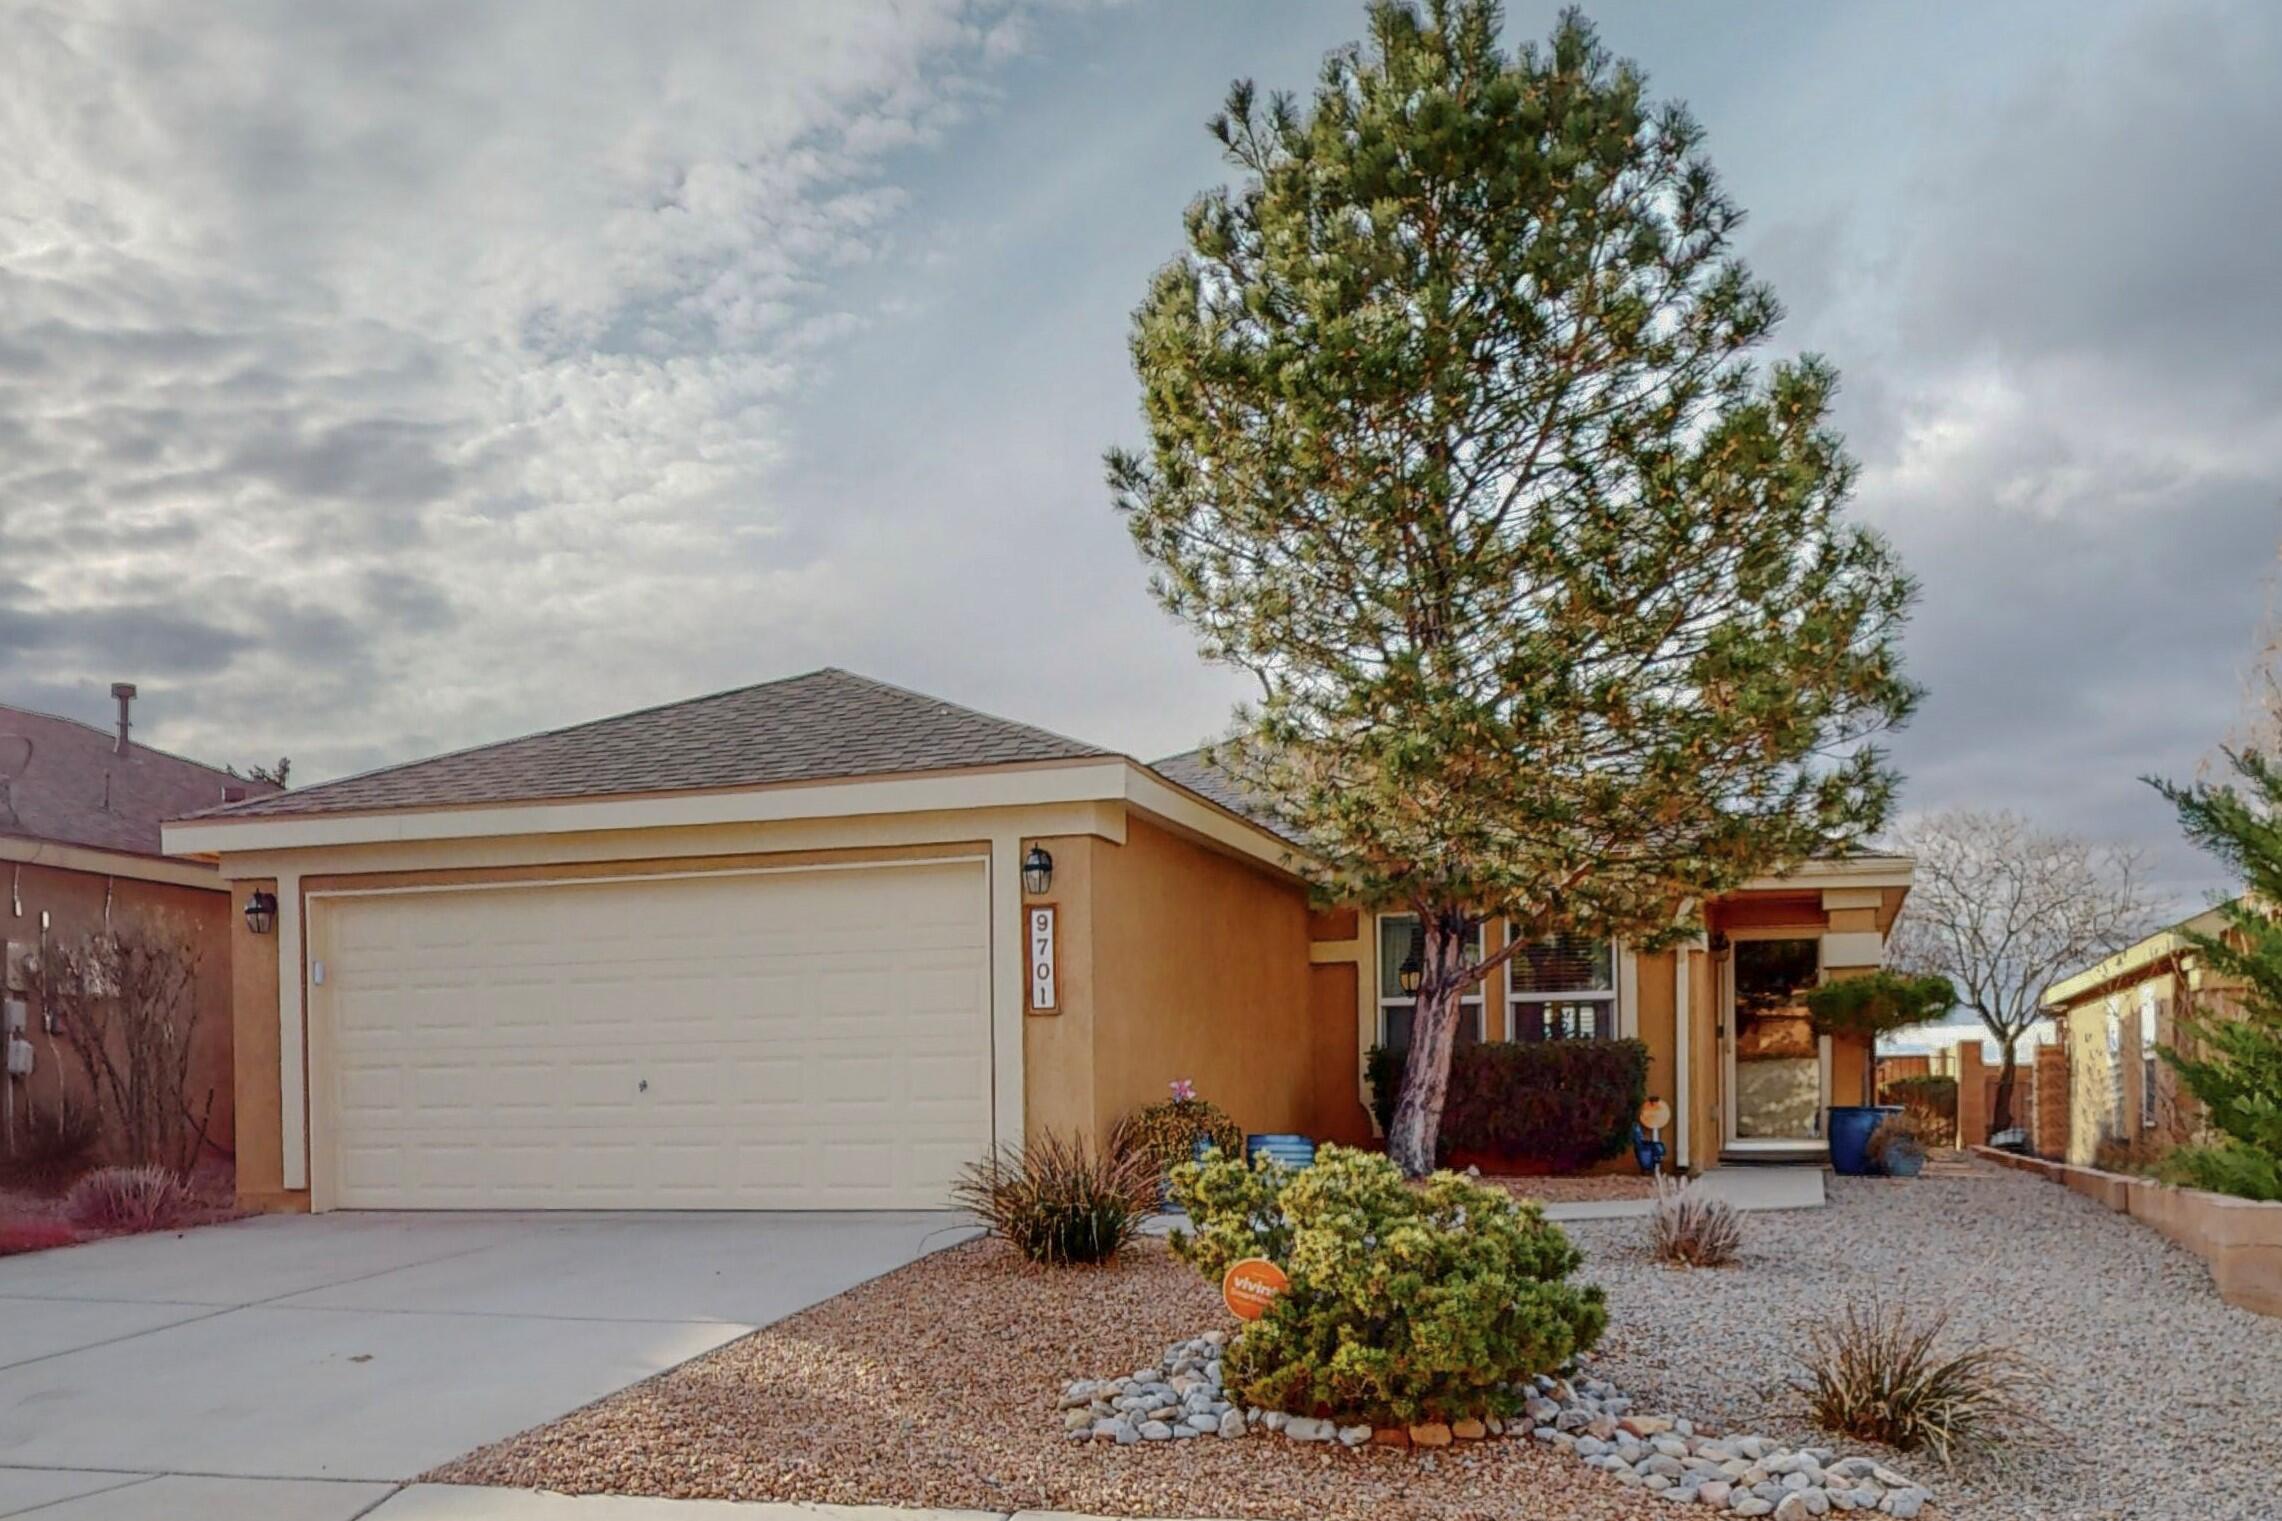 Pride of ownership shows throughout this beautiful home in Ventana West!  3 bedrooms plus a flex room that can be used as a formal dining or office!  Lots of recent updates include a new roof (2022), laminate wood flooring (2019), remodeled bathroom, garbage disposal, kitchen faucet and lighting.  Refrigerator, washer and dryer stay!  Shelves in the garage stay.  Save money on solar!  Refrigerated air.